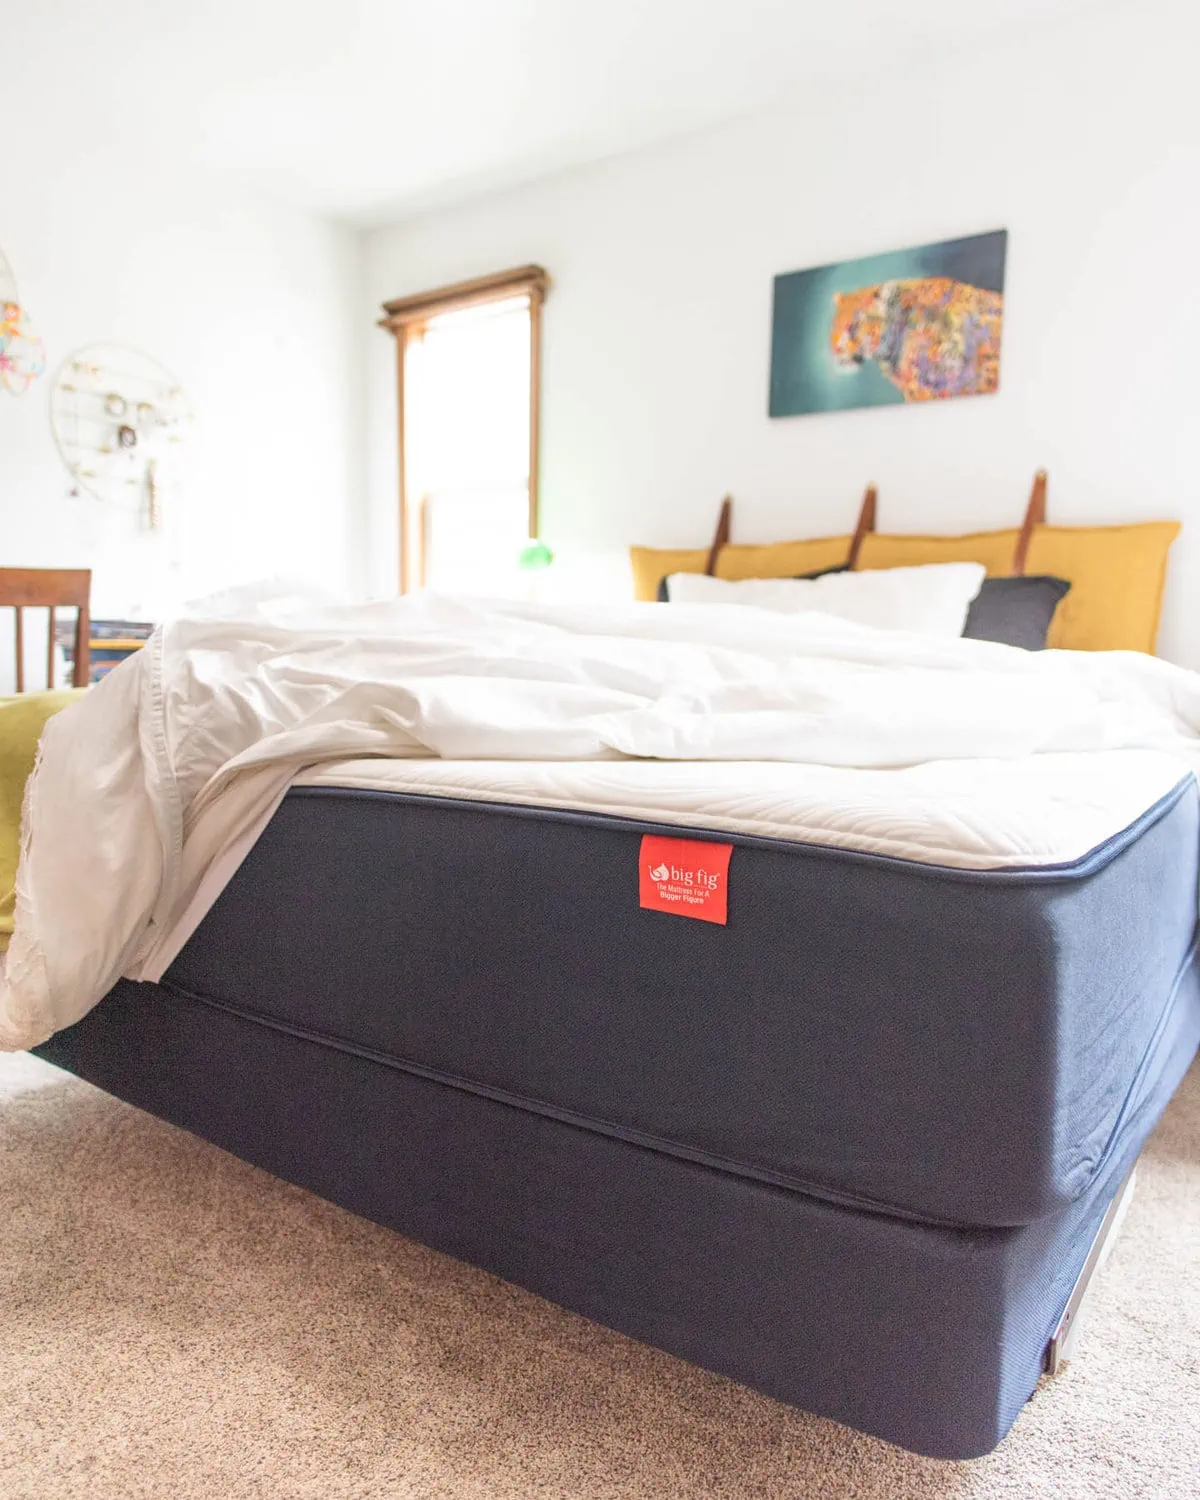 big fig mattress without cover